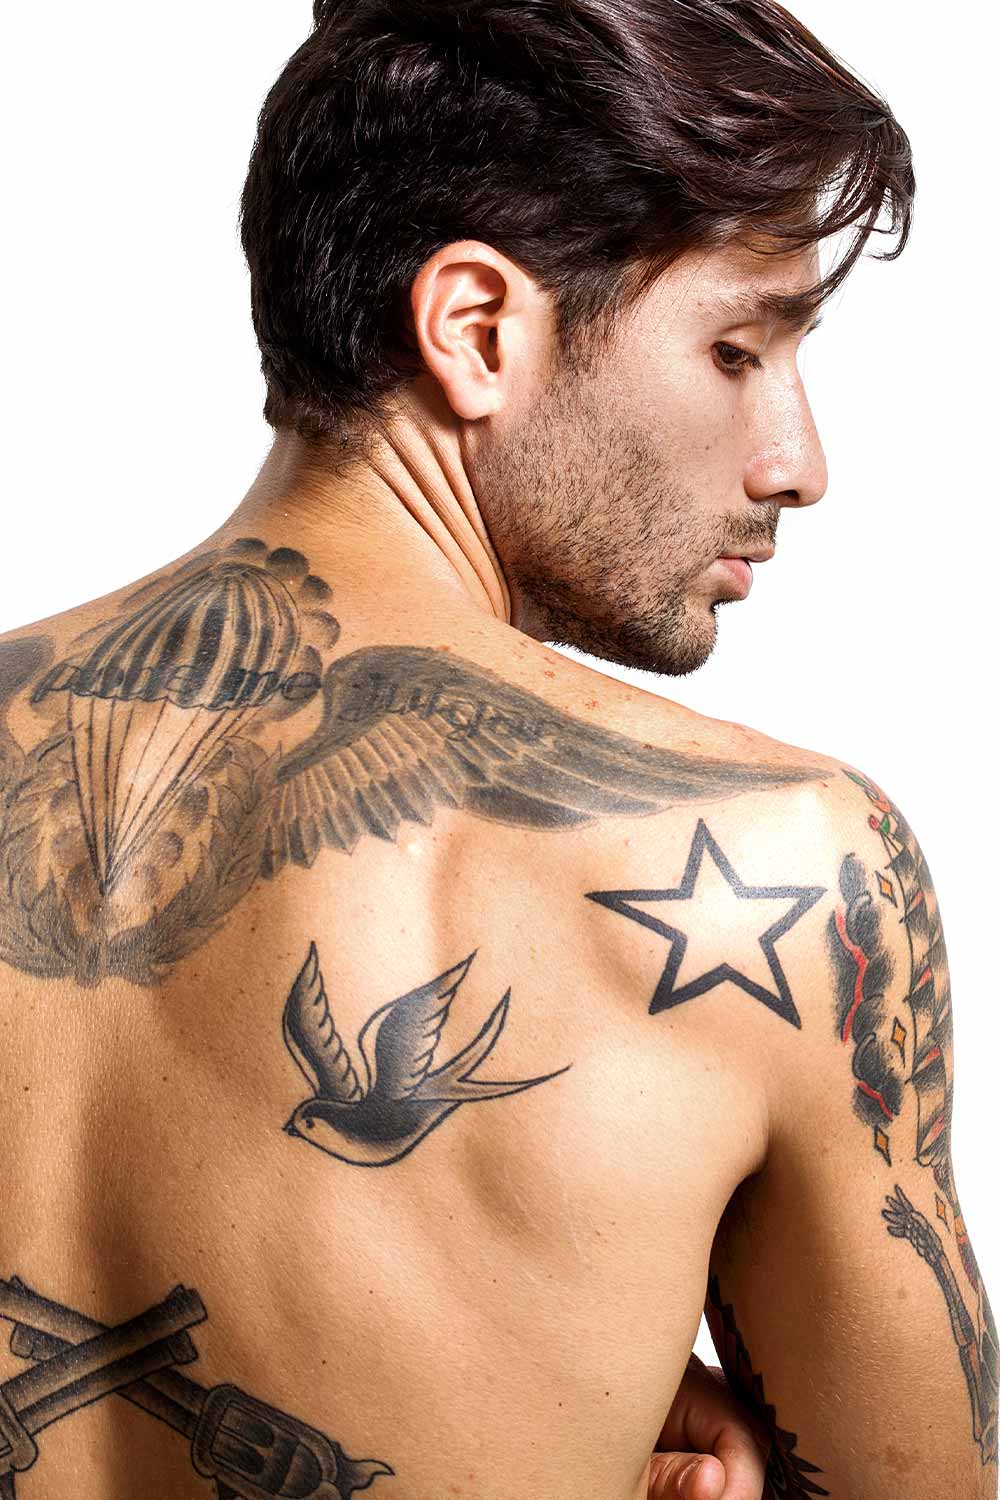 30513 Back Tattoo Images Stock Photos 3D objects  Vectors   Shutterstock